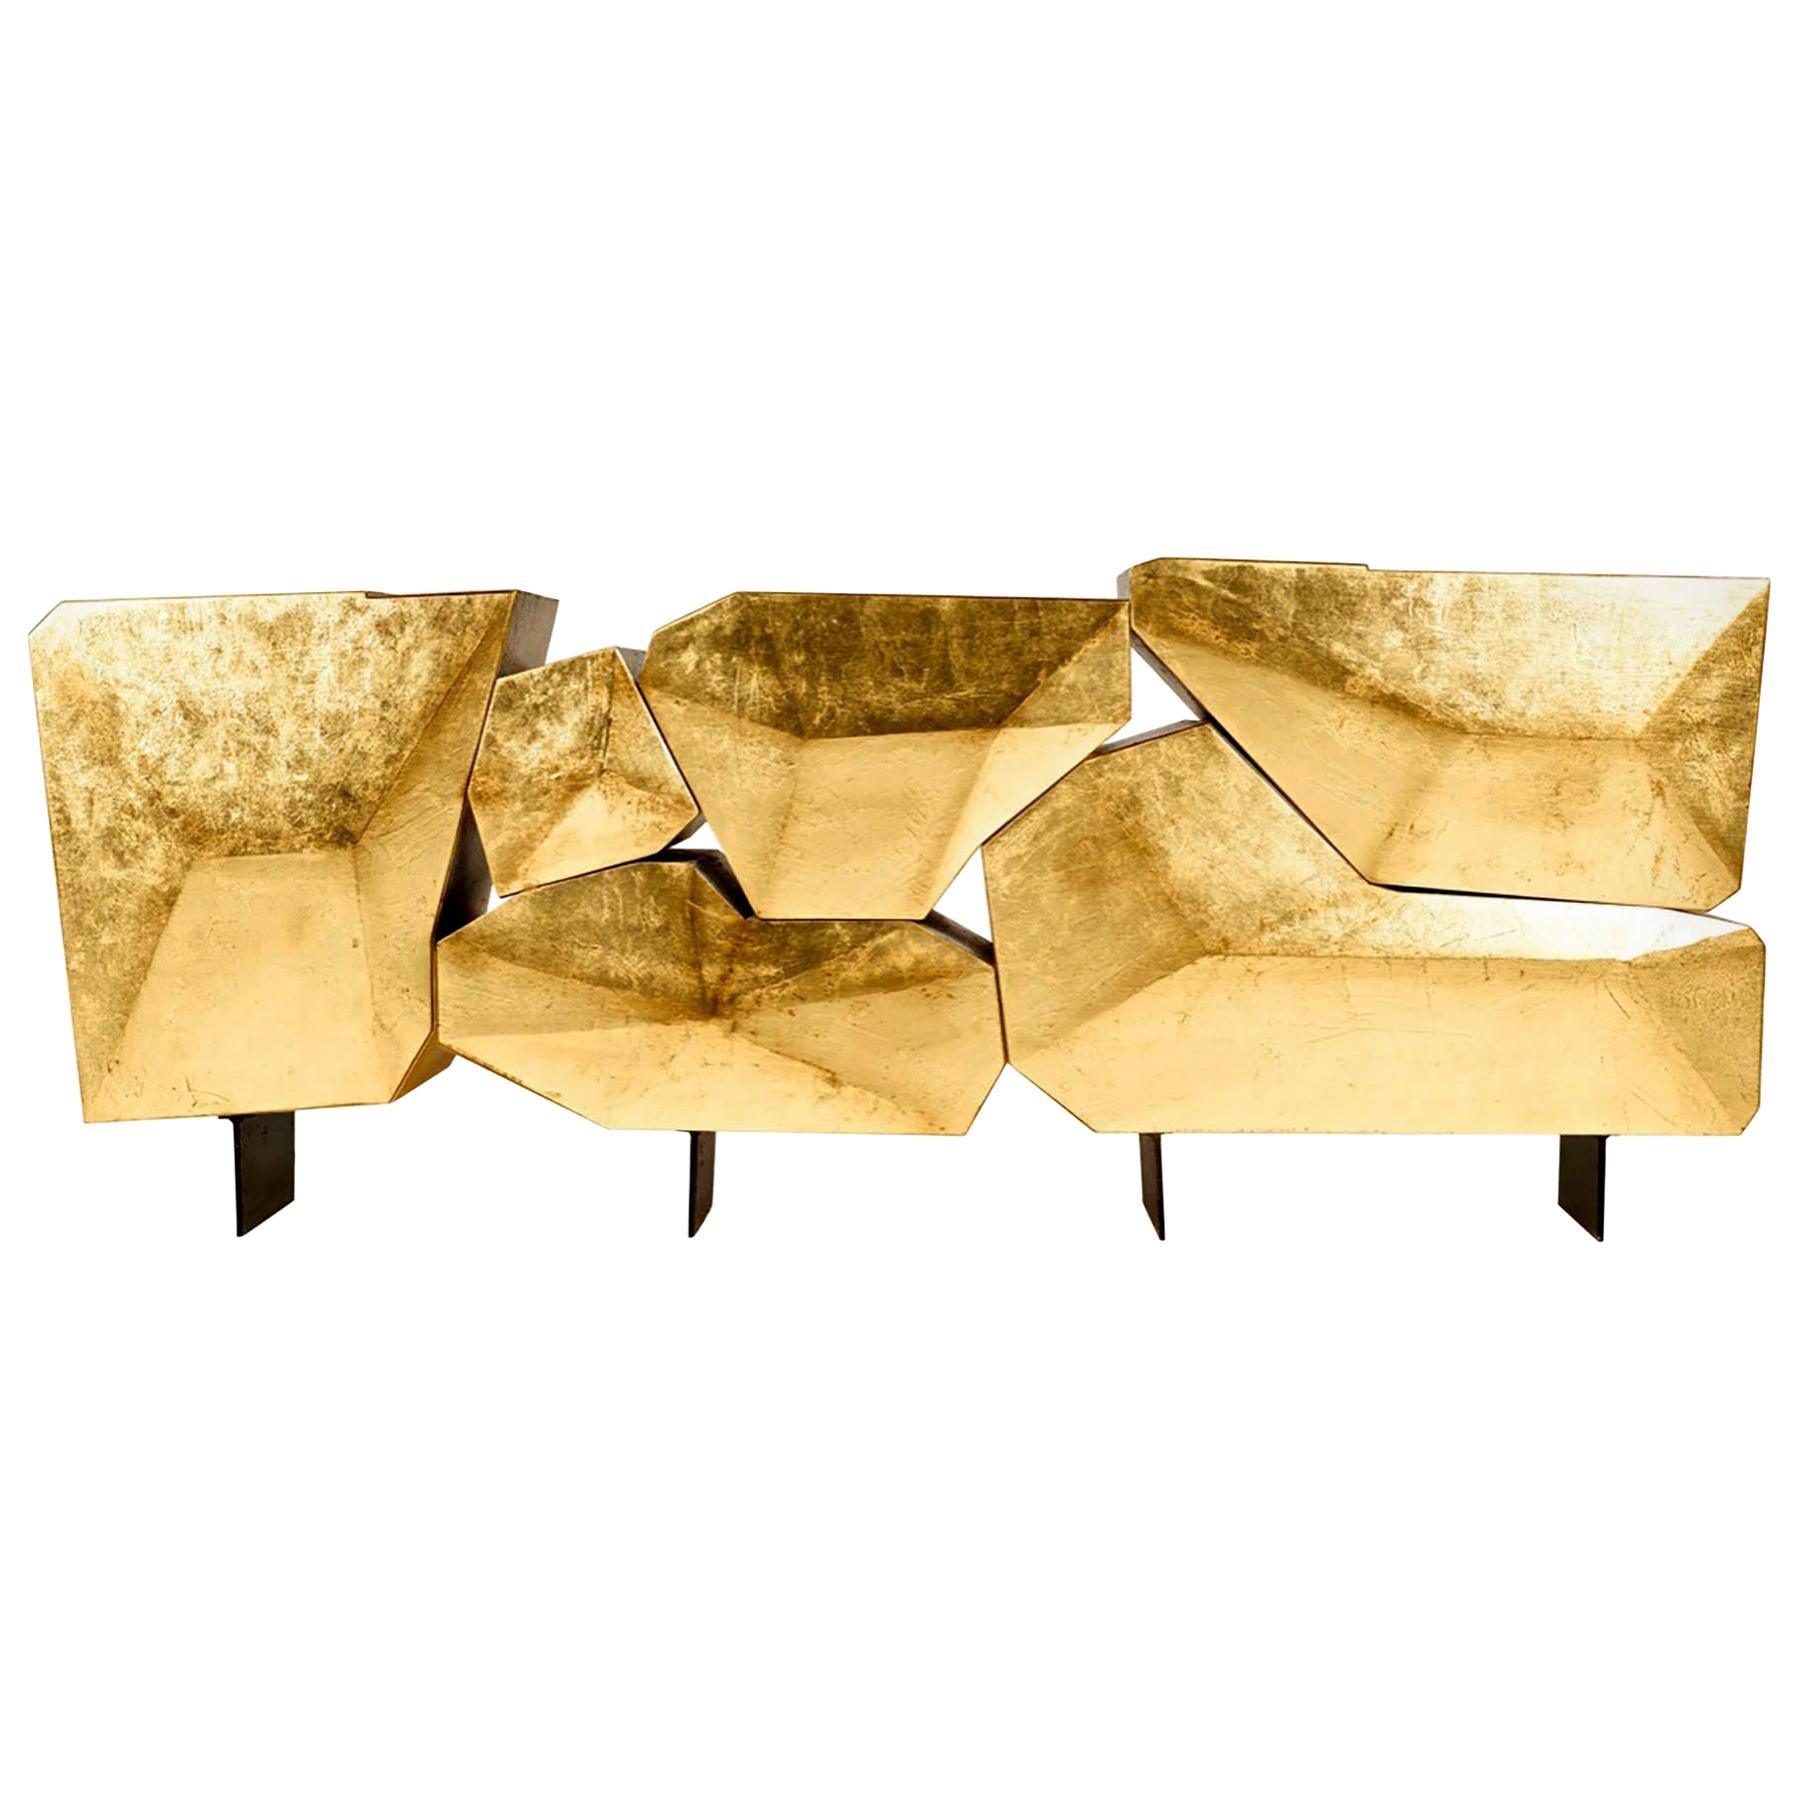 Stunning and Luxury Gilt Modern Contemporary Sideboard in Iron Wood & Gold Leaf